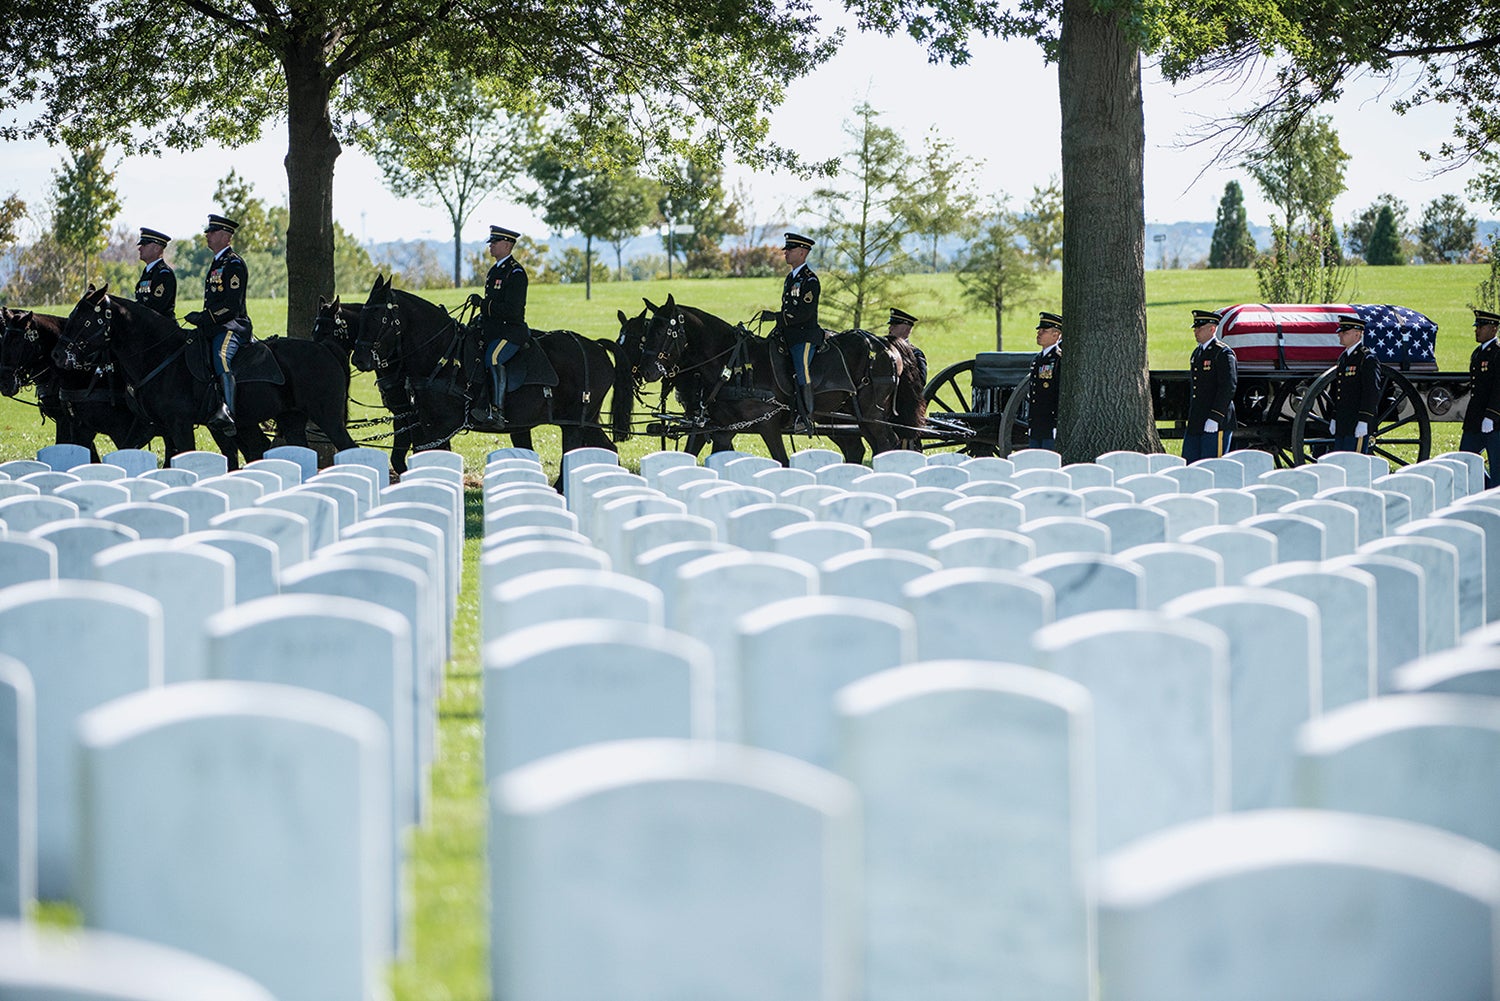 The 3rd U.S. Infantry Regiment (The Old Guard) Caisson Platoon conducts military funeral honors for Lt. Col. Robert Nopp, who died during the Vietnam War, at Arlington National Cemetery in October 2018.